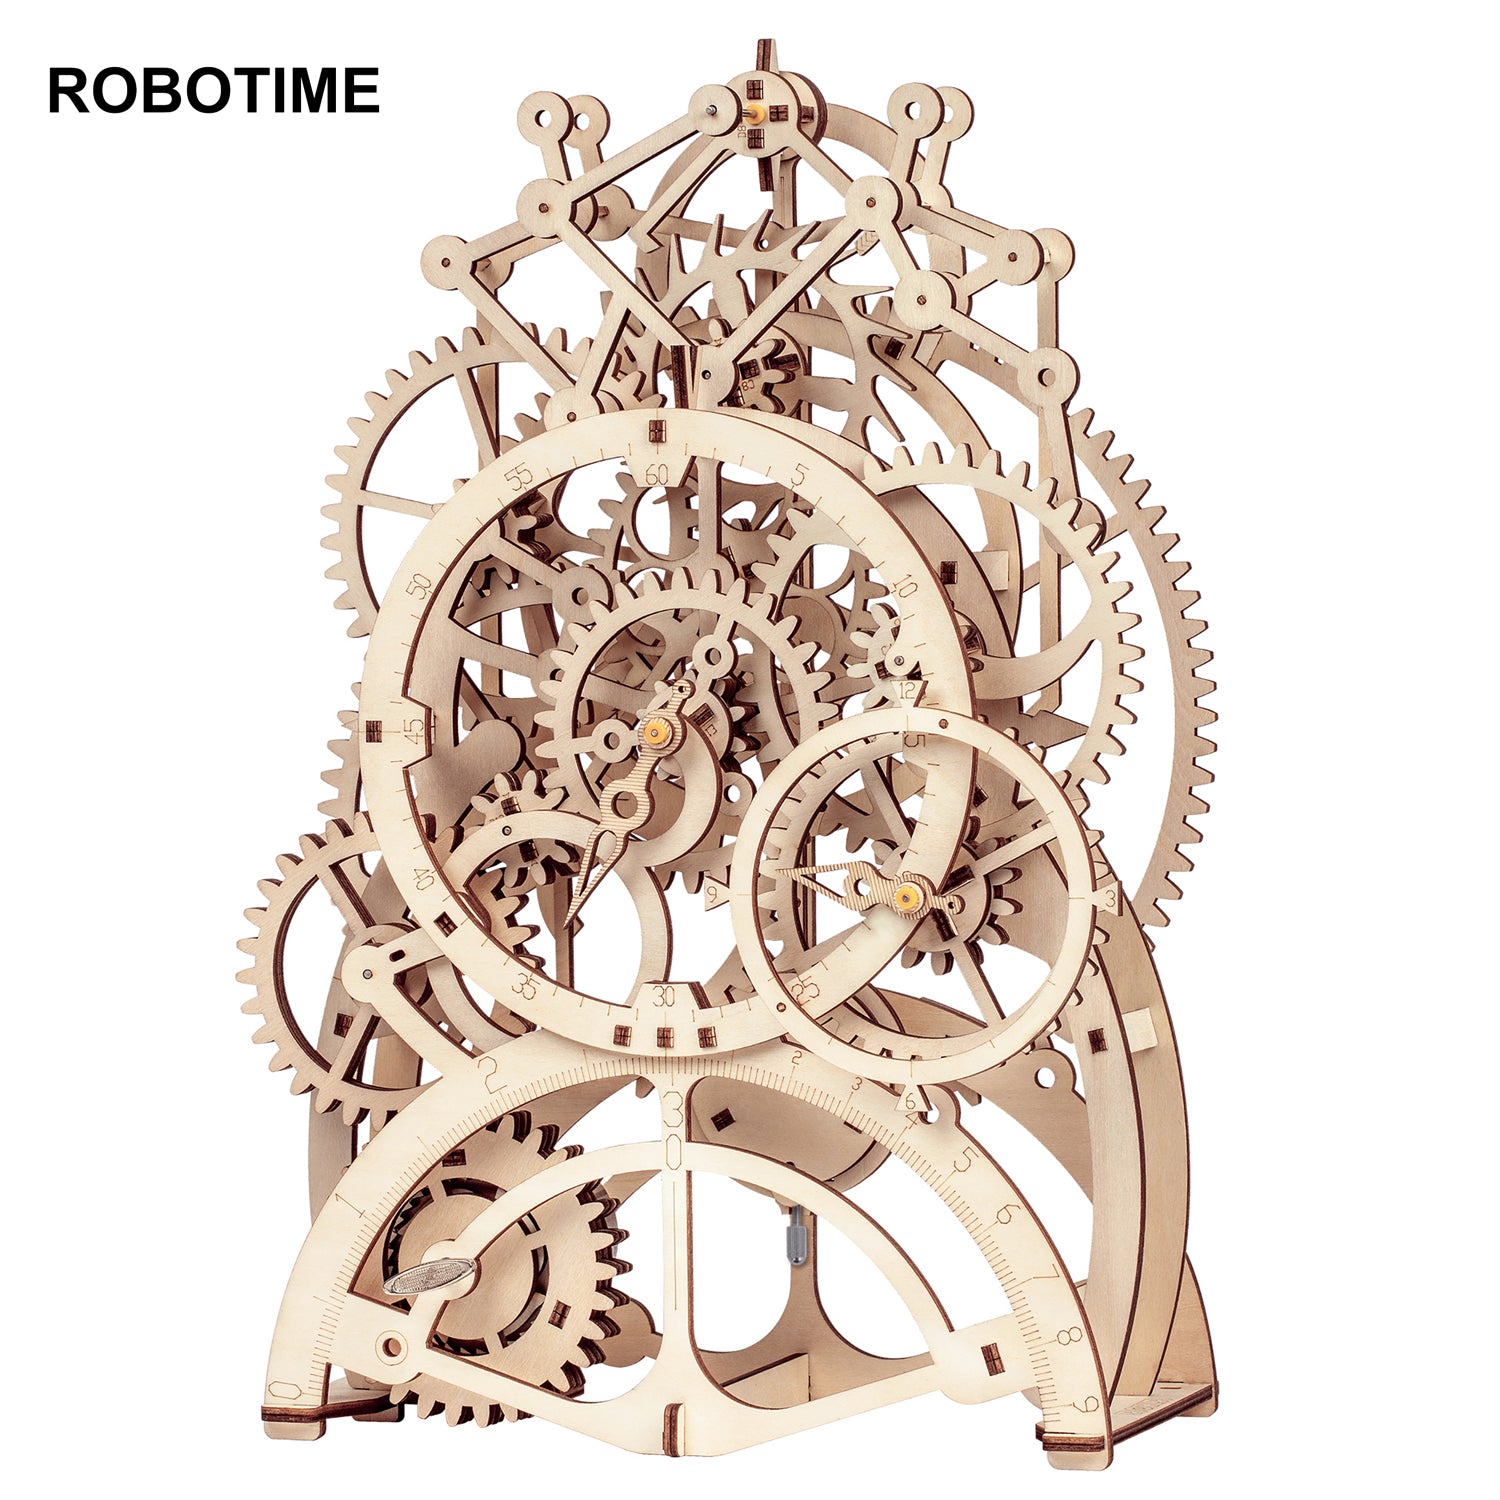 Robotime Rokr Pendulum Clock 170 Pcs 3D Wooden Puzzle Toys Building Block Kits Assembly Gifts For Children - TryKid